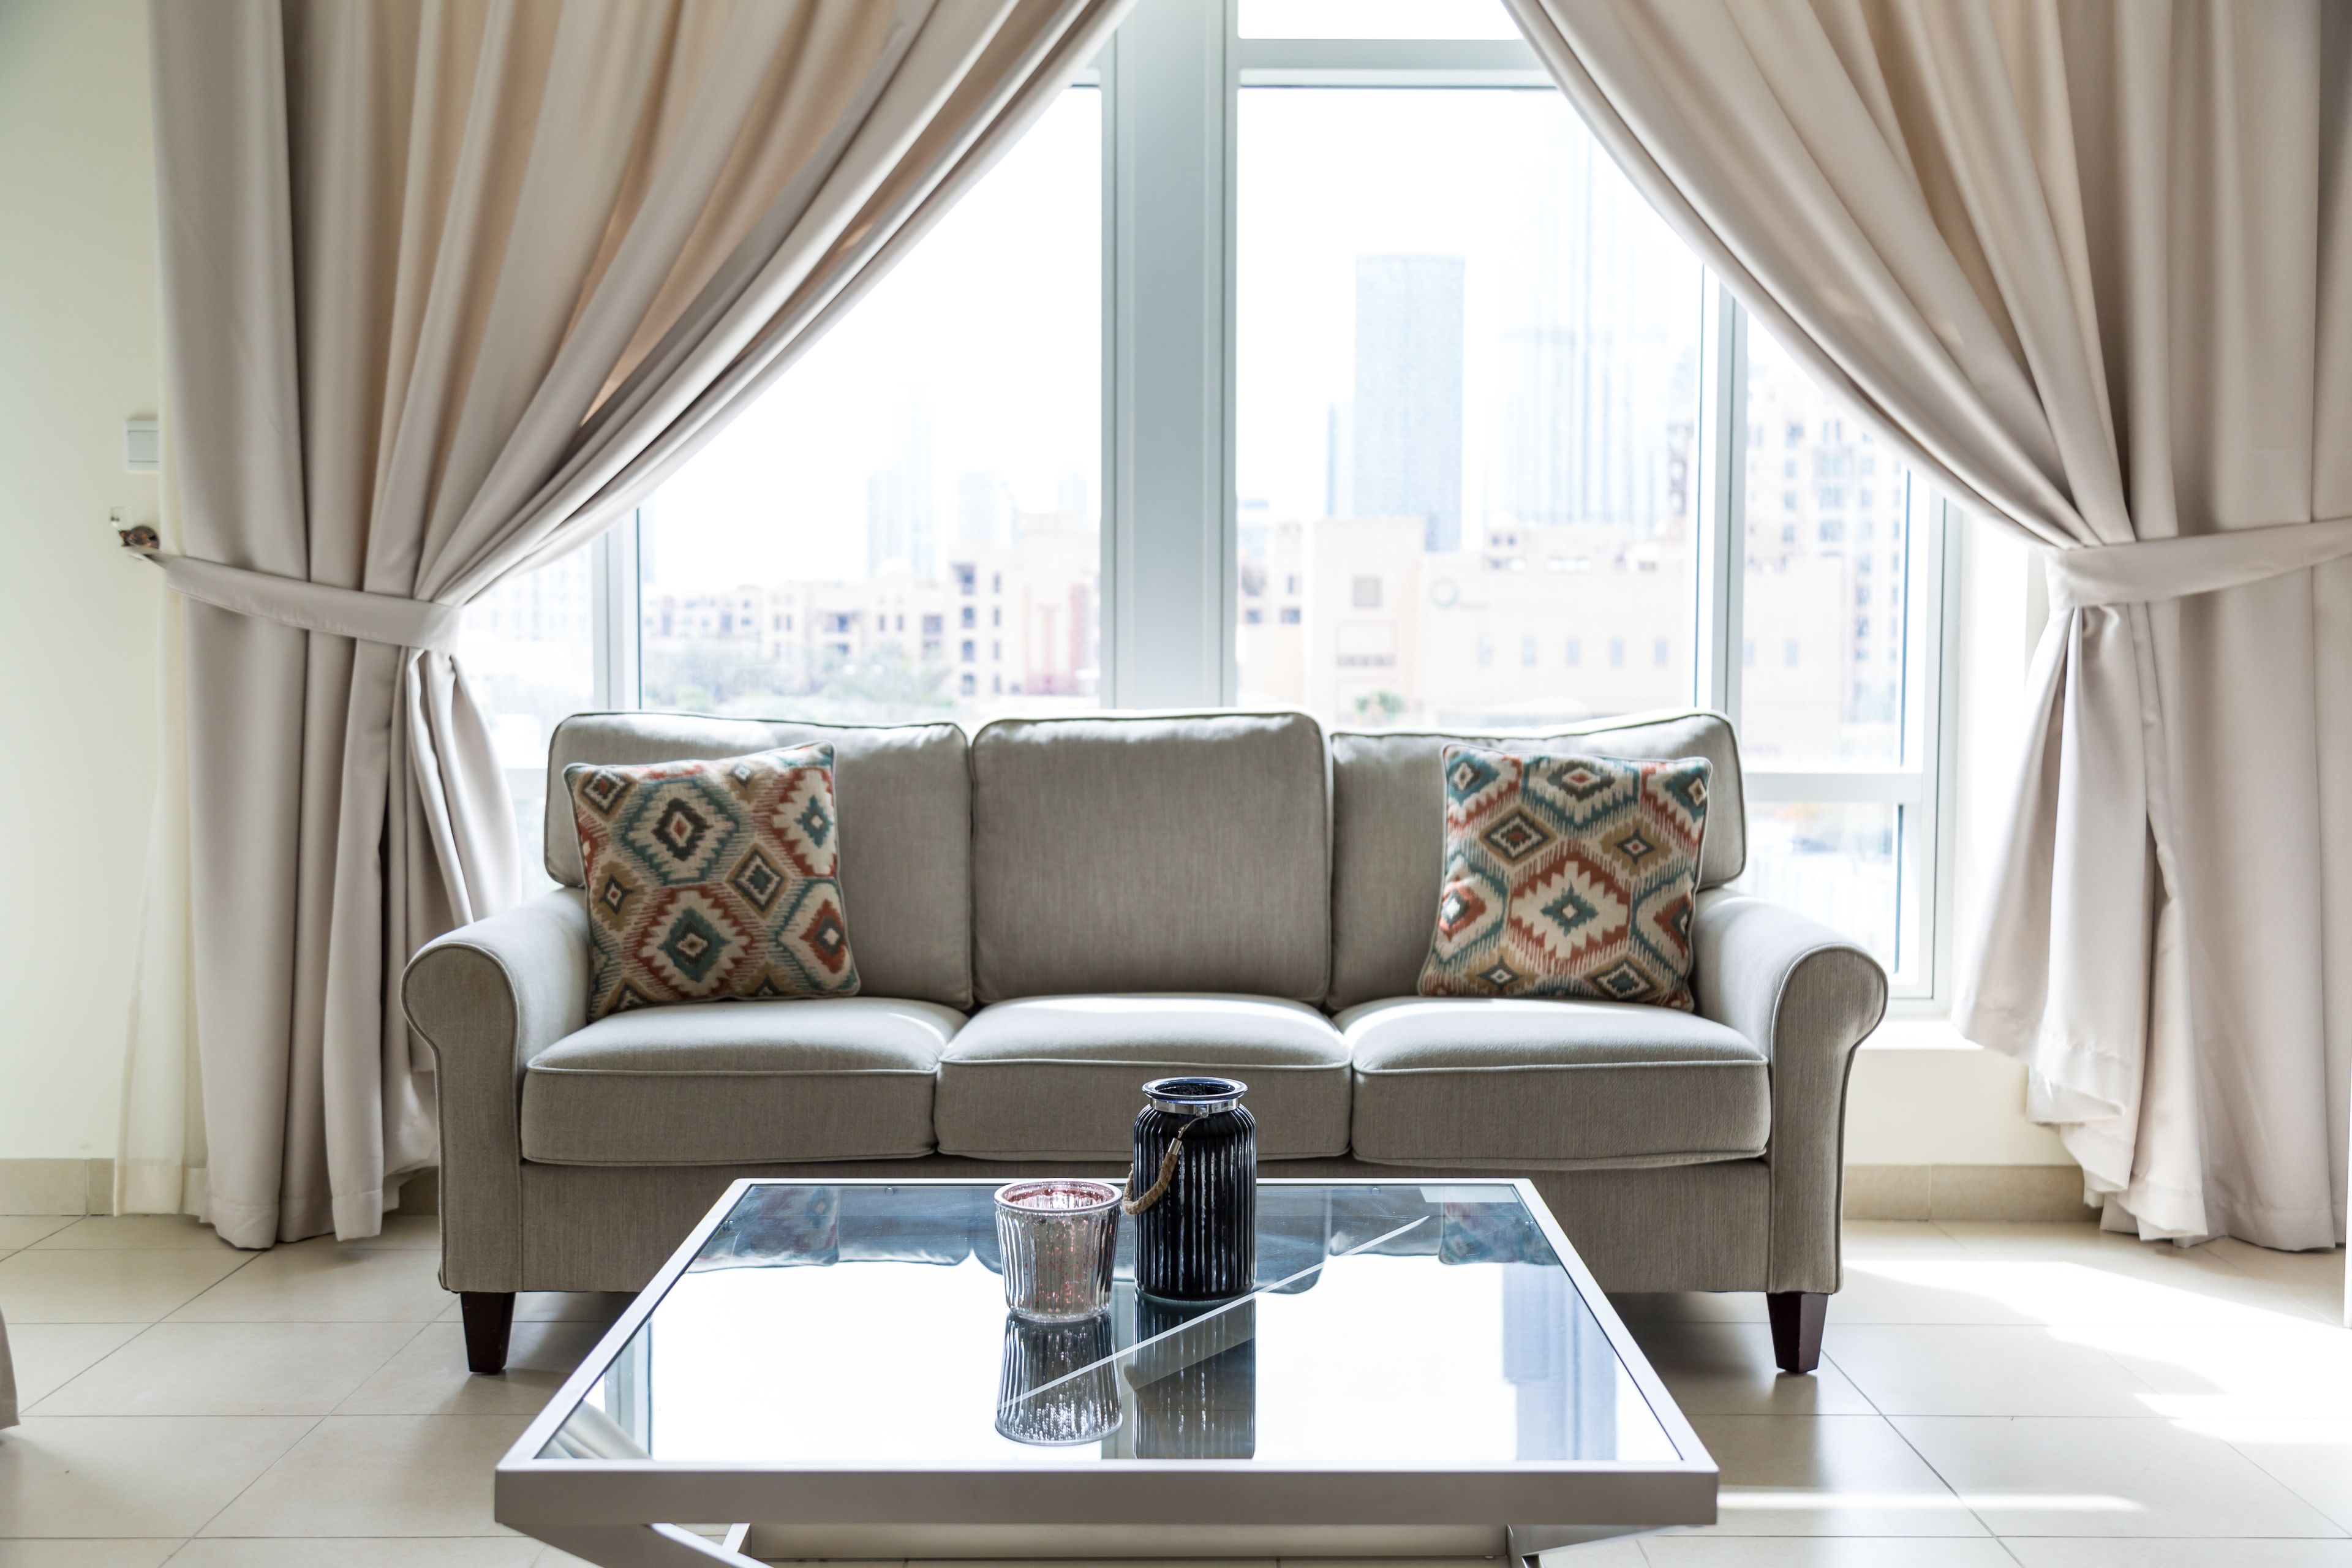 Burj Views by HiGuests Vacation Homes